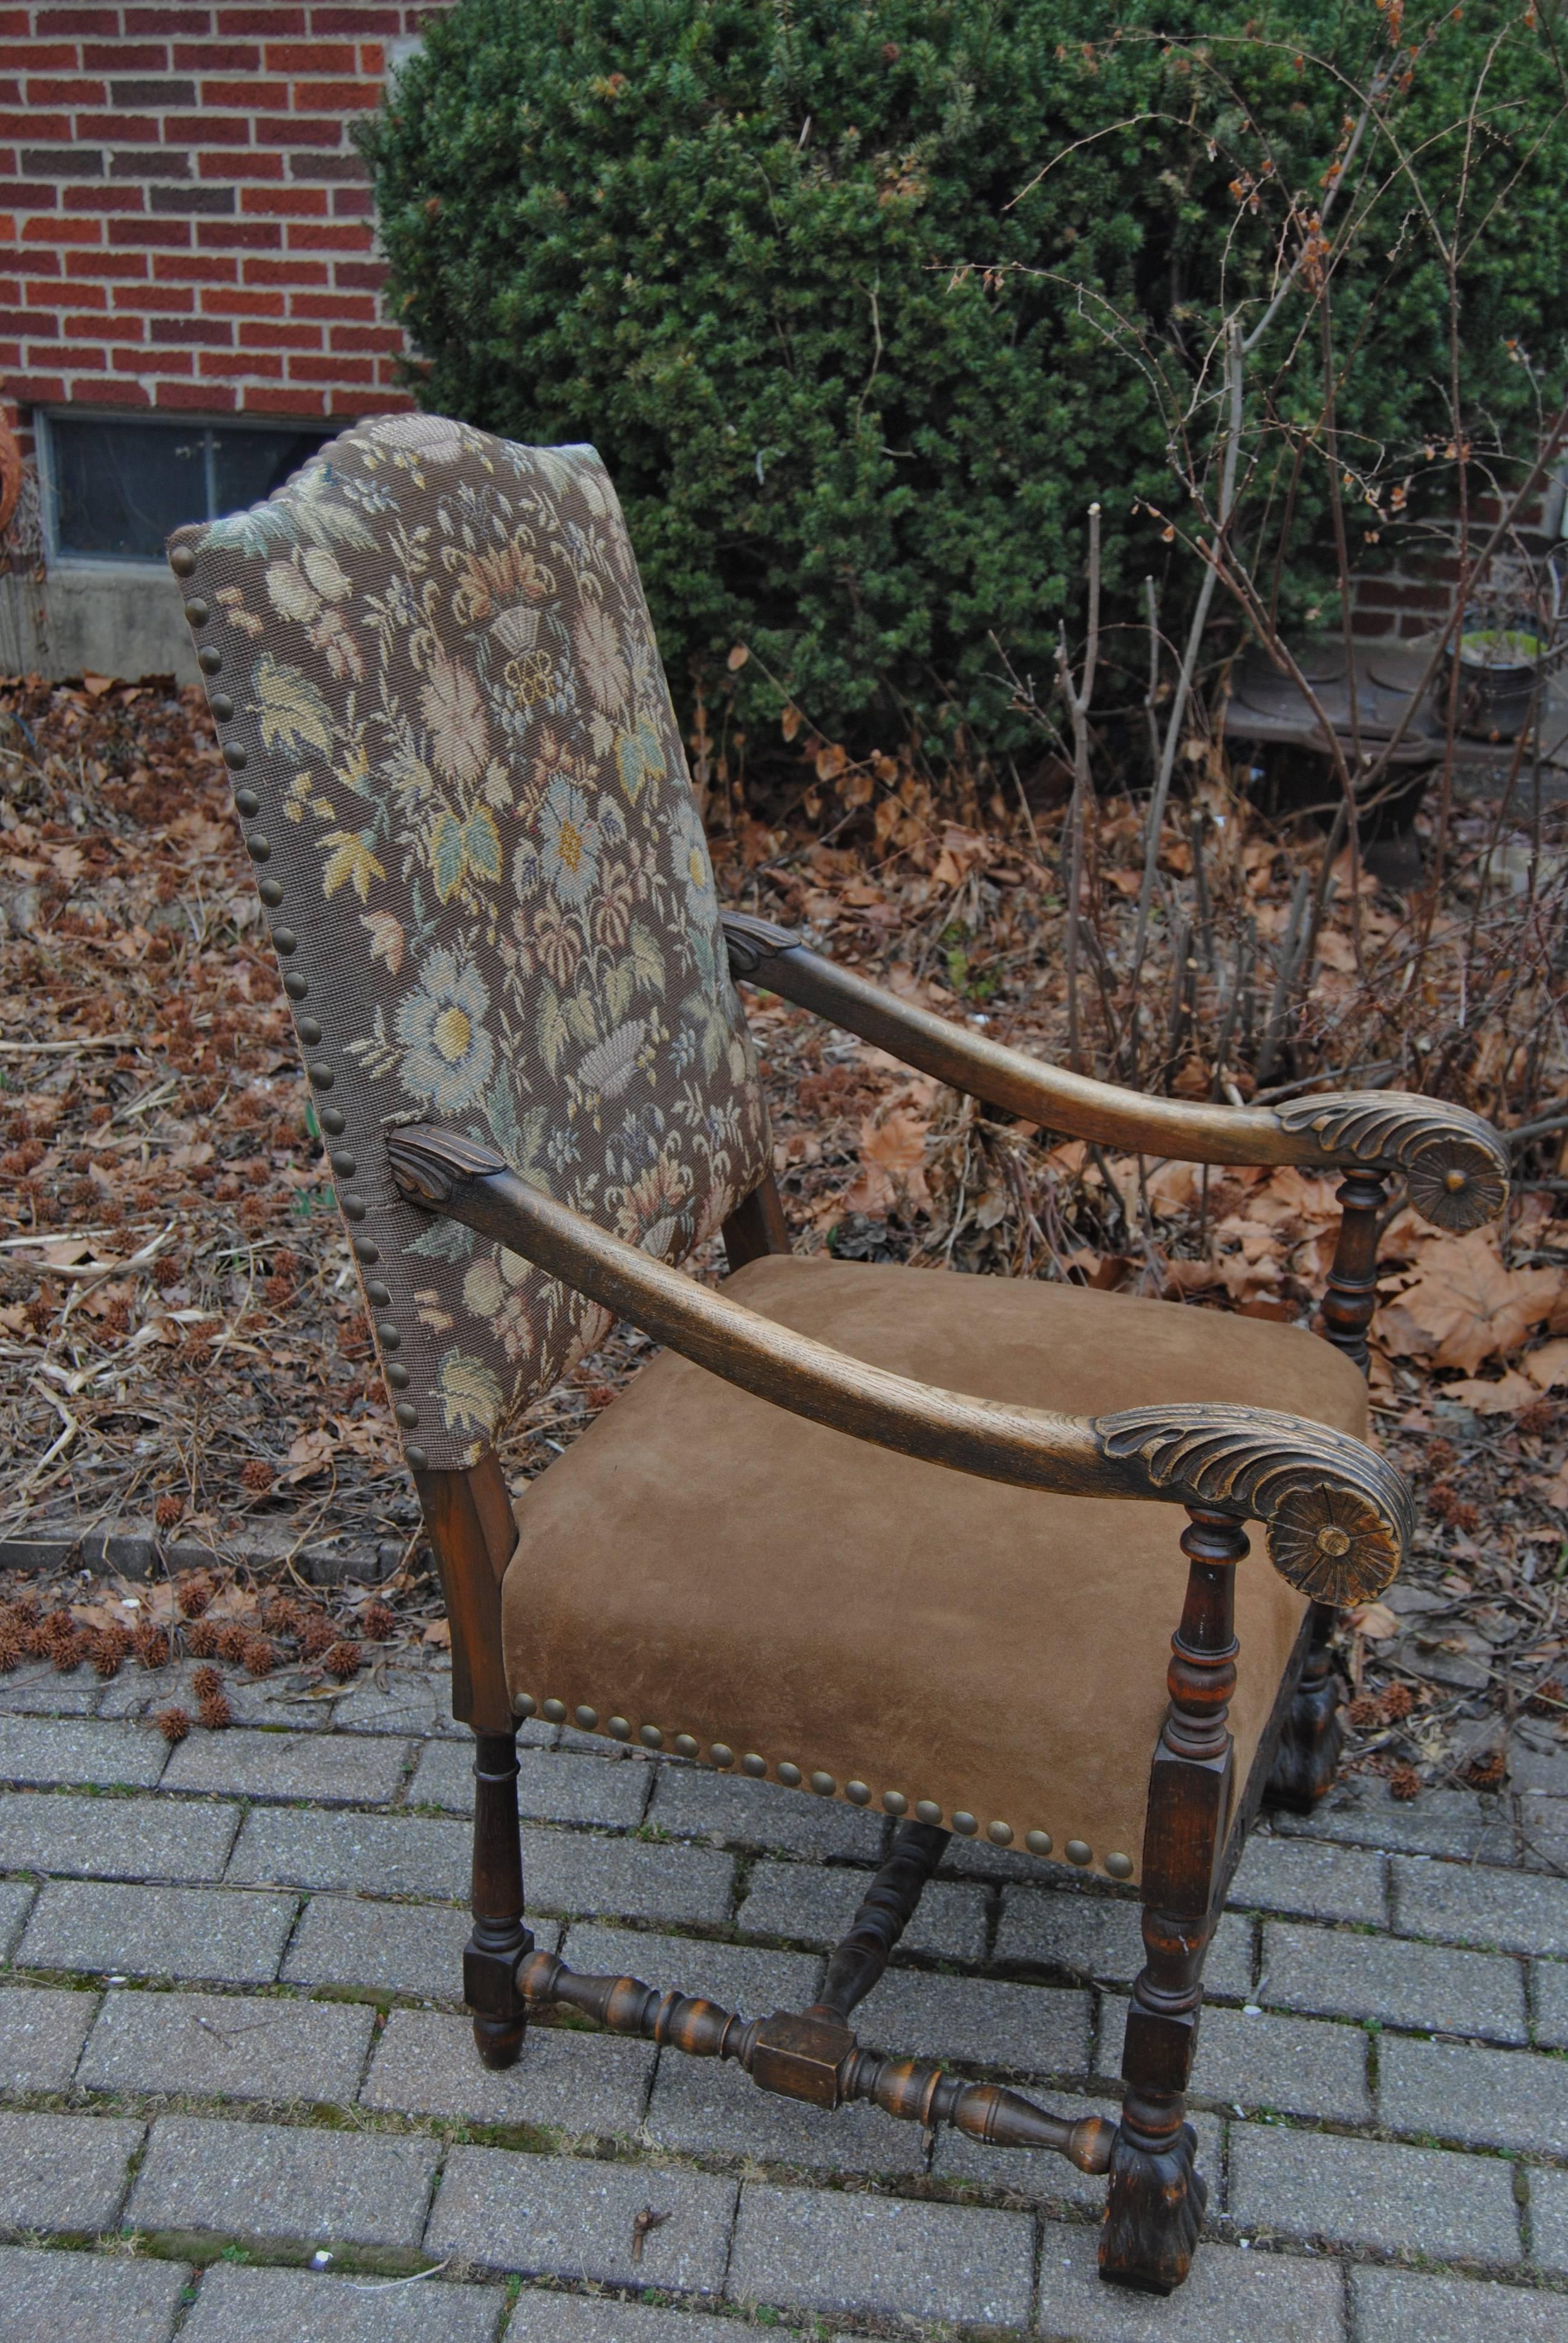 Antique European armchair with original needlepoint back. Seat newly reupholstered in Edelman suede leather. Back of chair in original antique velvet with nailheads. Hand-carved wood has original finish.